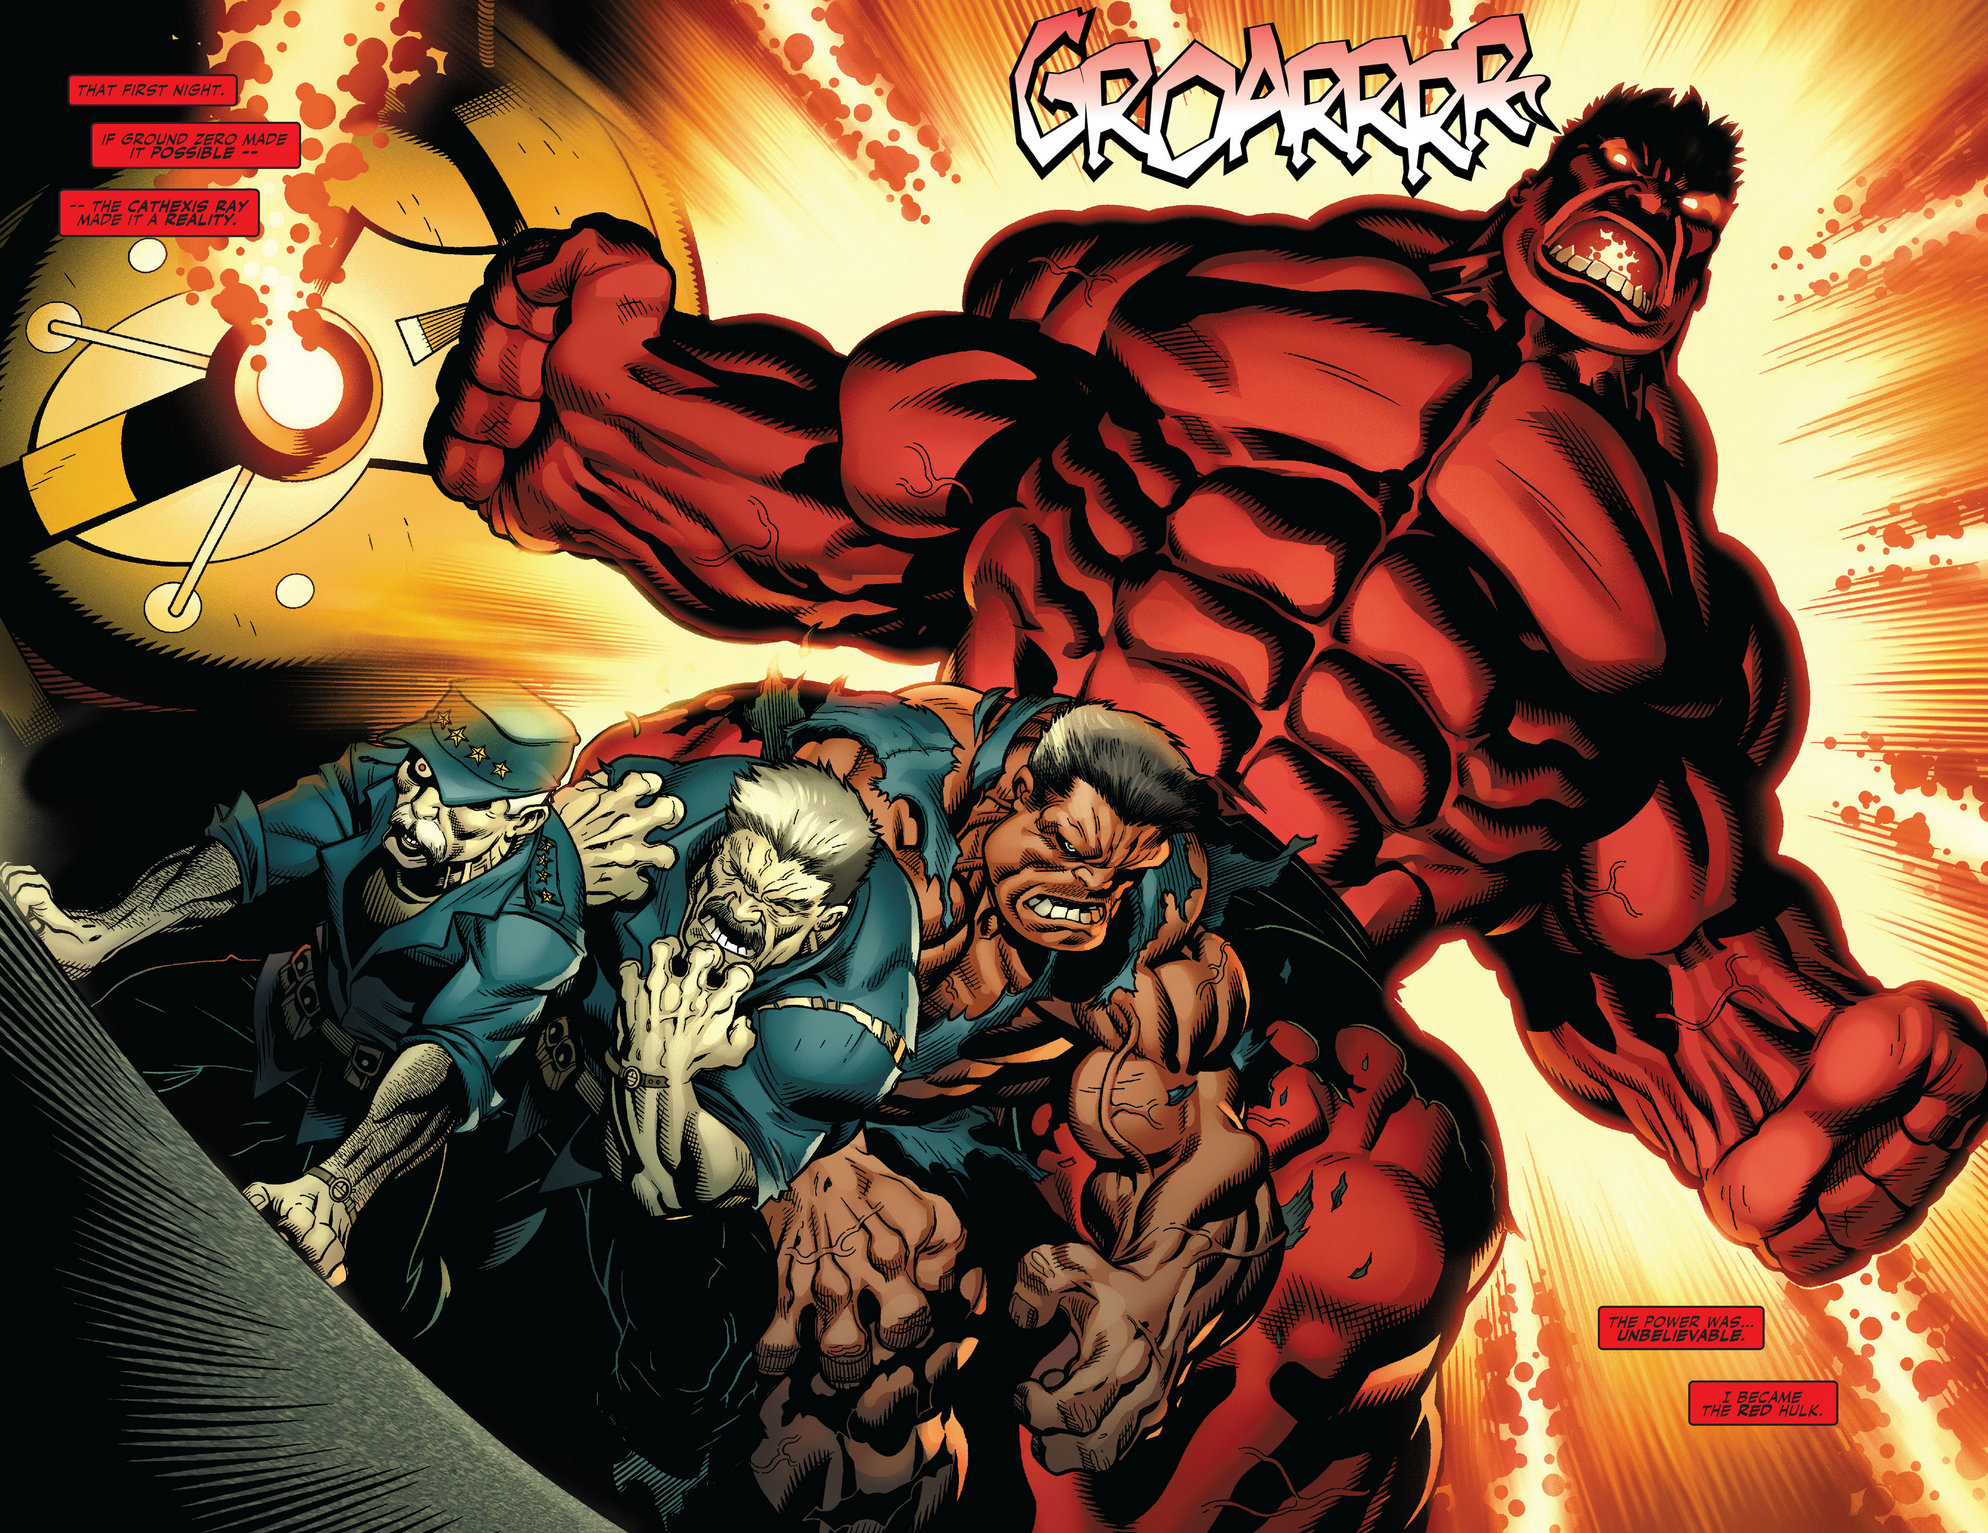 The Red Hulk is revealed in Hulk Vol. 2 #23 "Who is the Red Hulk?" (2010), Marvel Comics. Words by Jeff Parker, art by Ed McGuinness, Mark Farmer, Dave Stewart, and Richard Starkings.